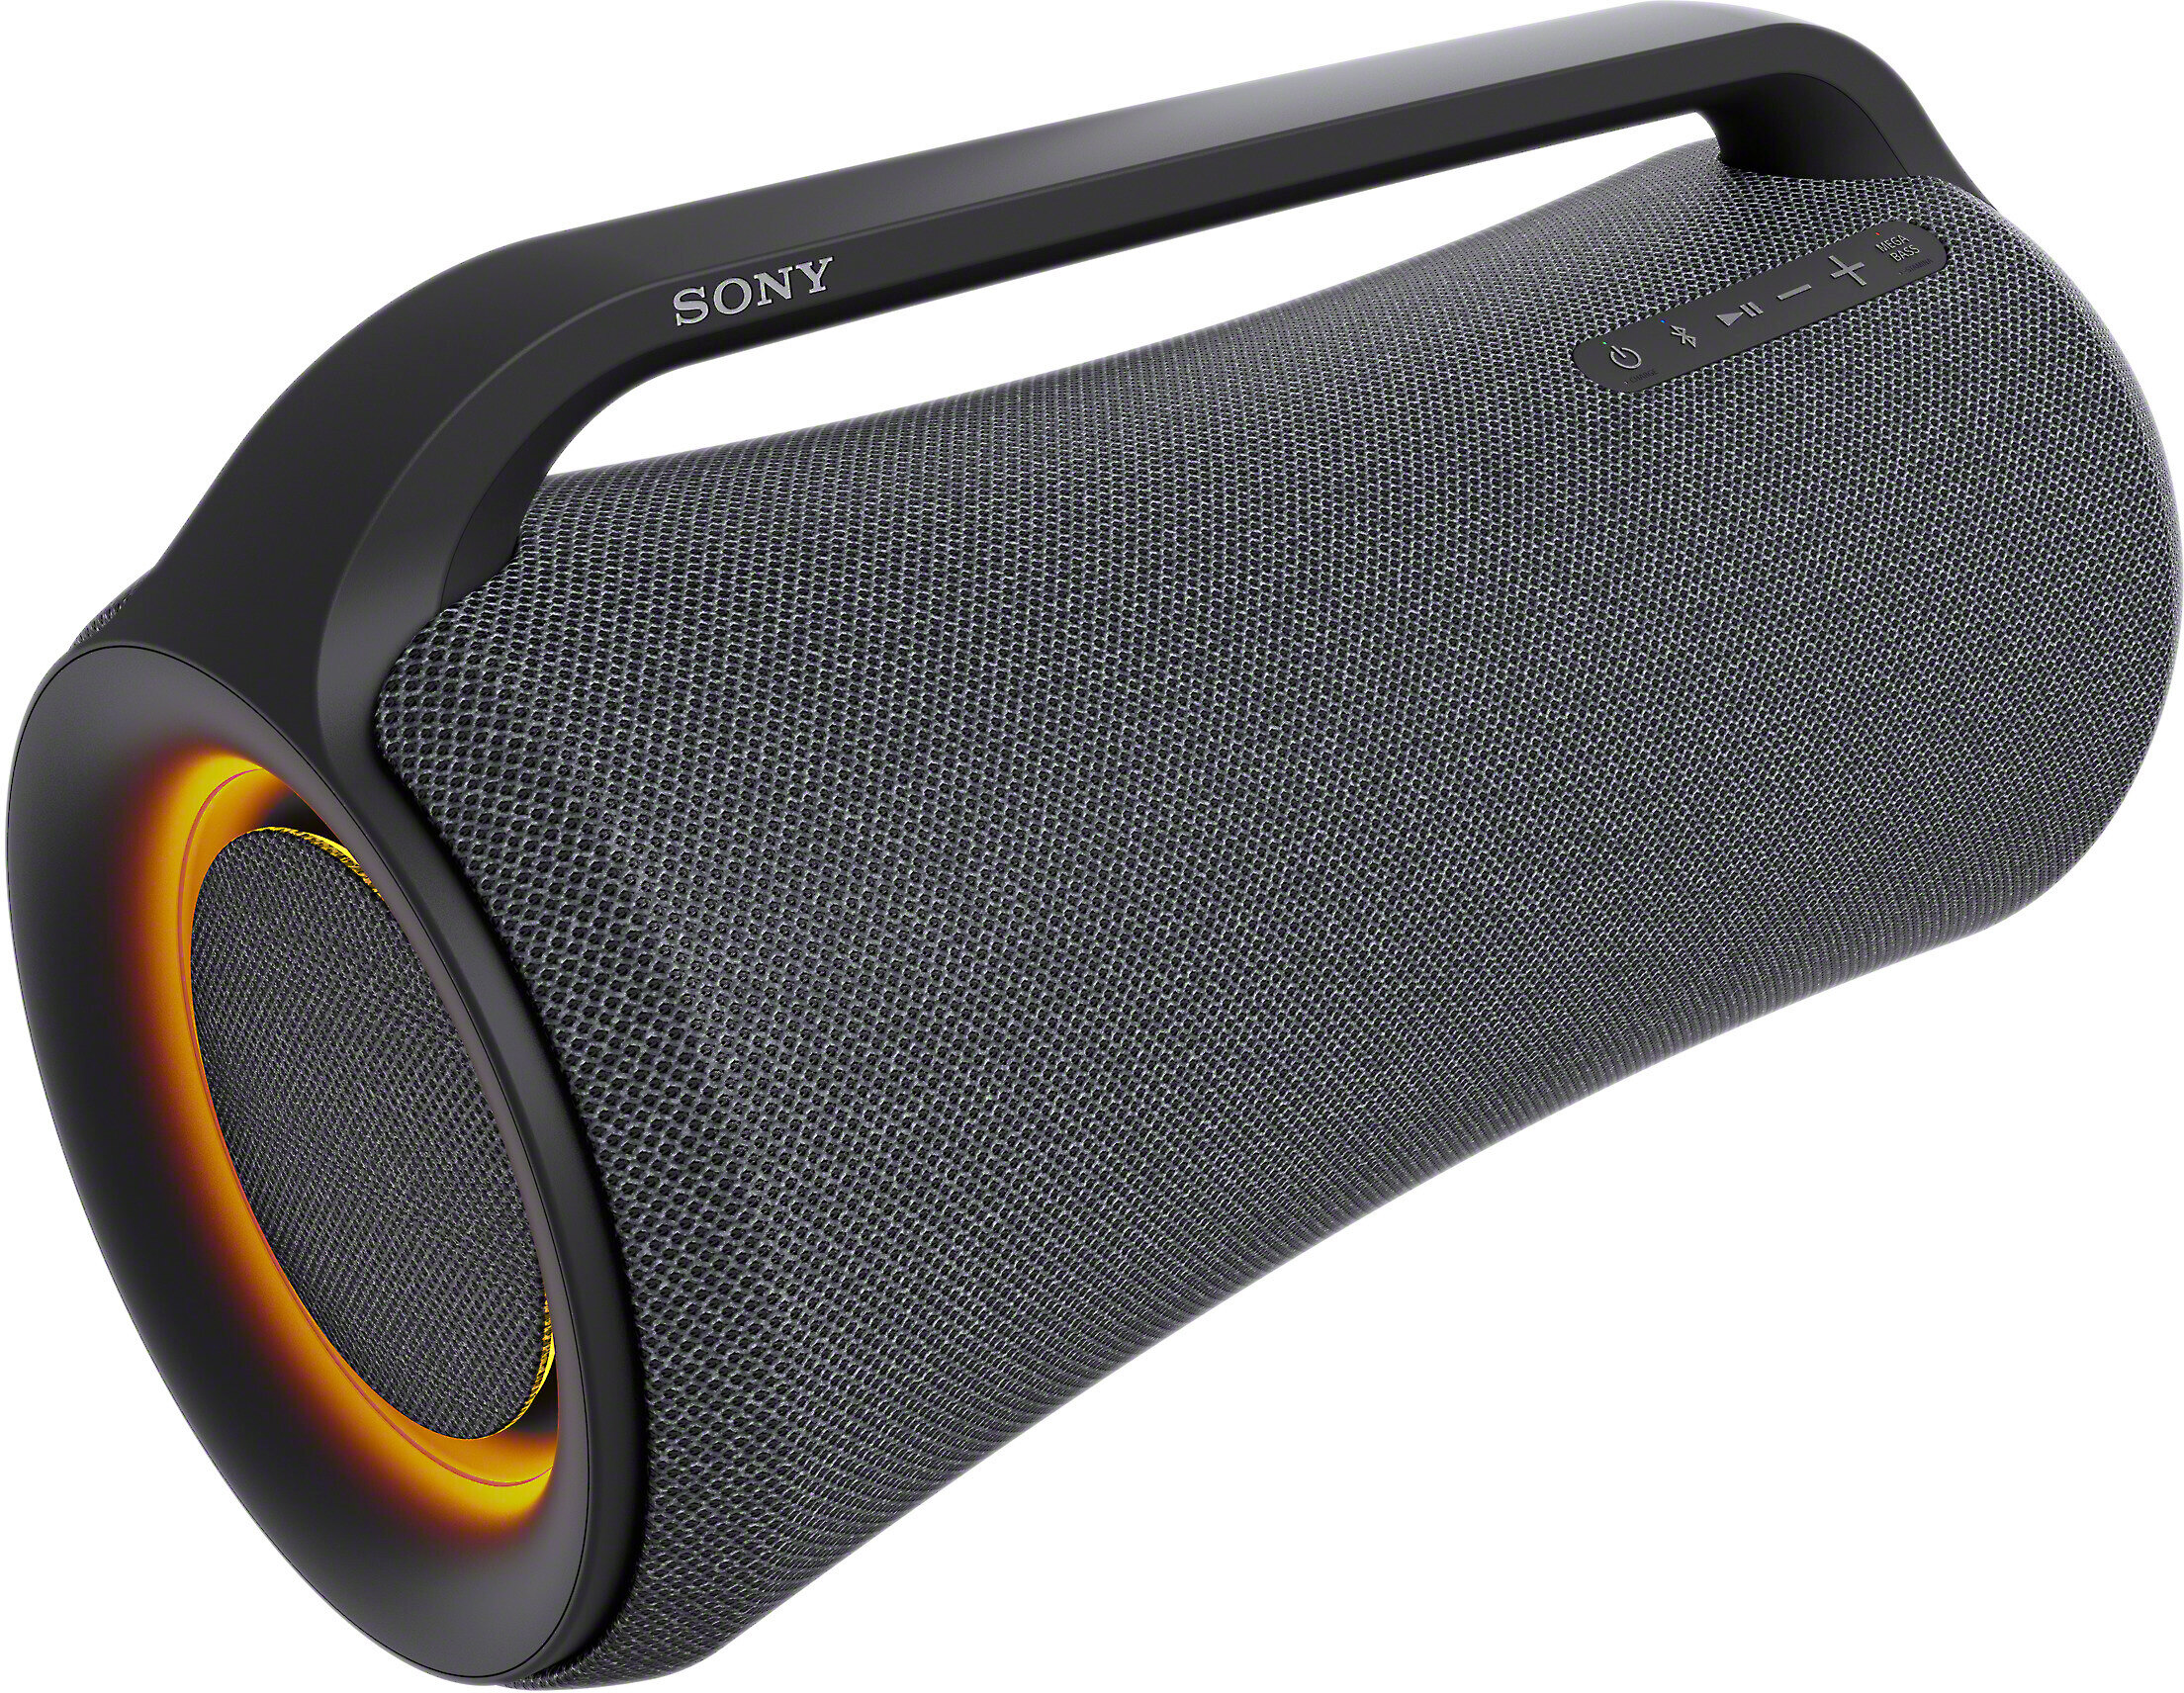 Sony Portable Bluetooth Speakers at Crutchfield